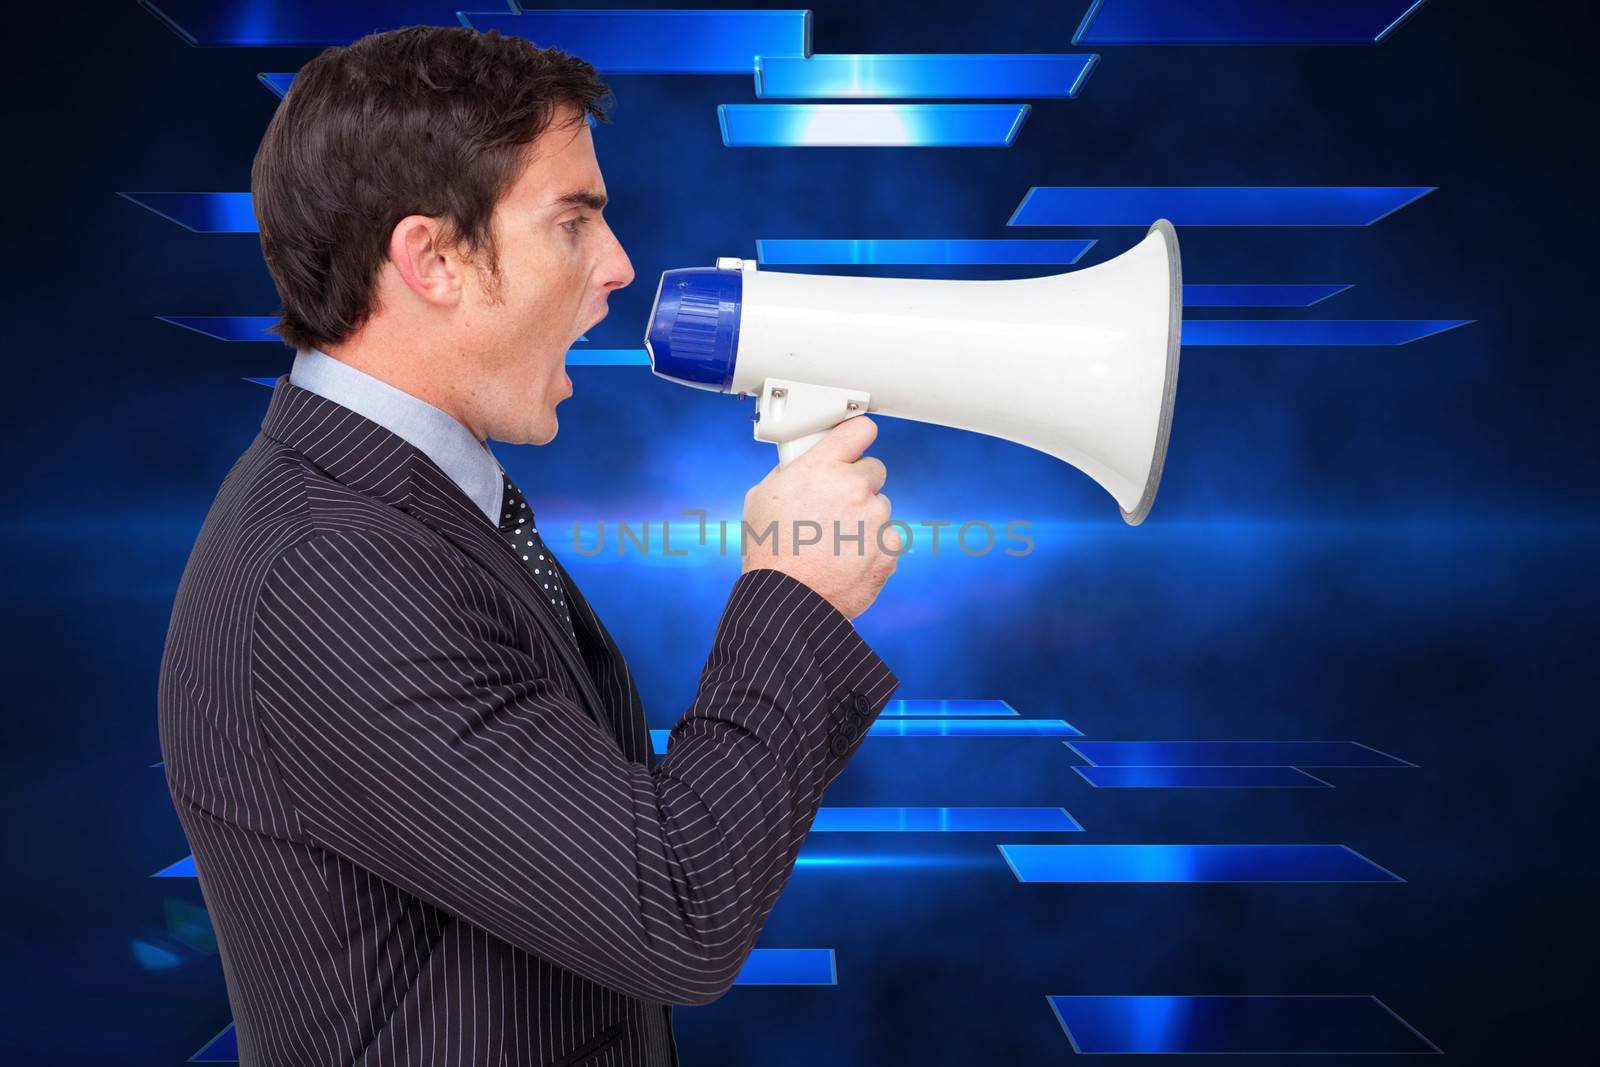 Profile of a businessman shouting through a megaphone against abstract technology background